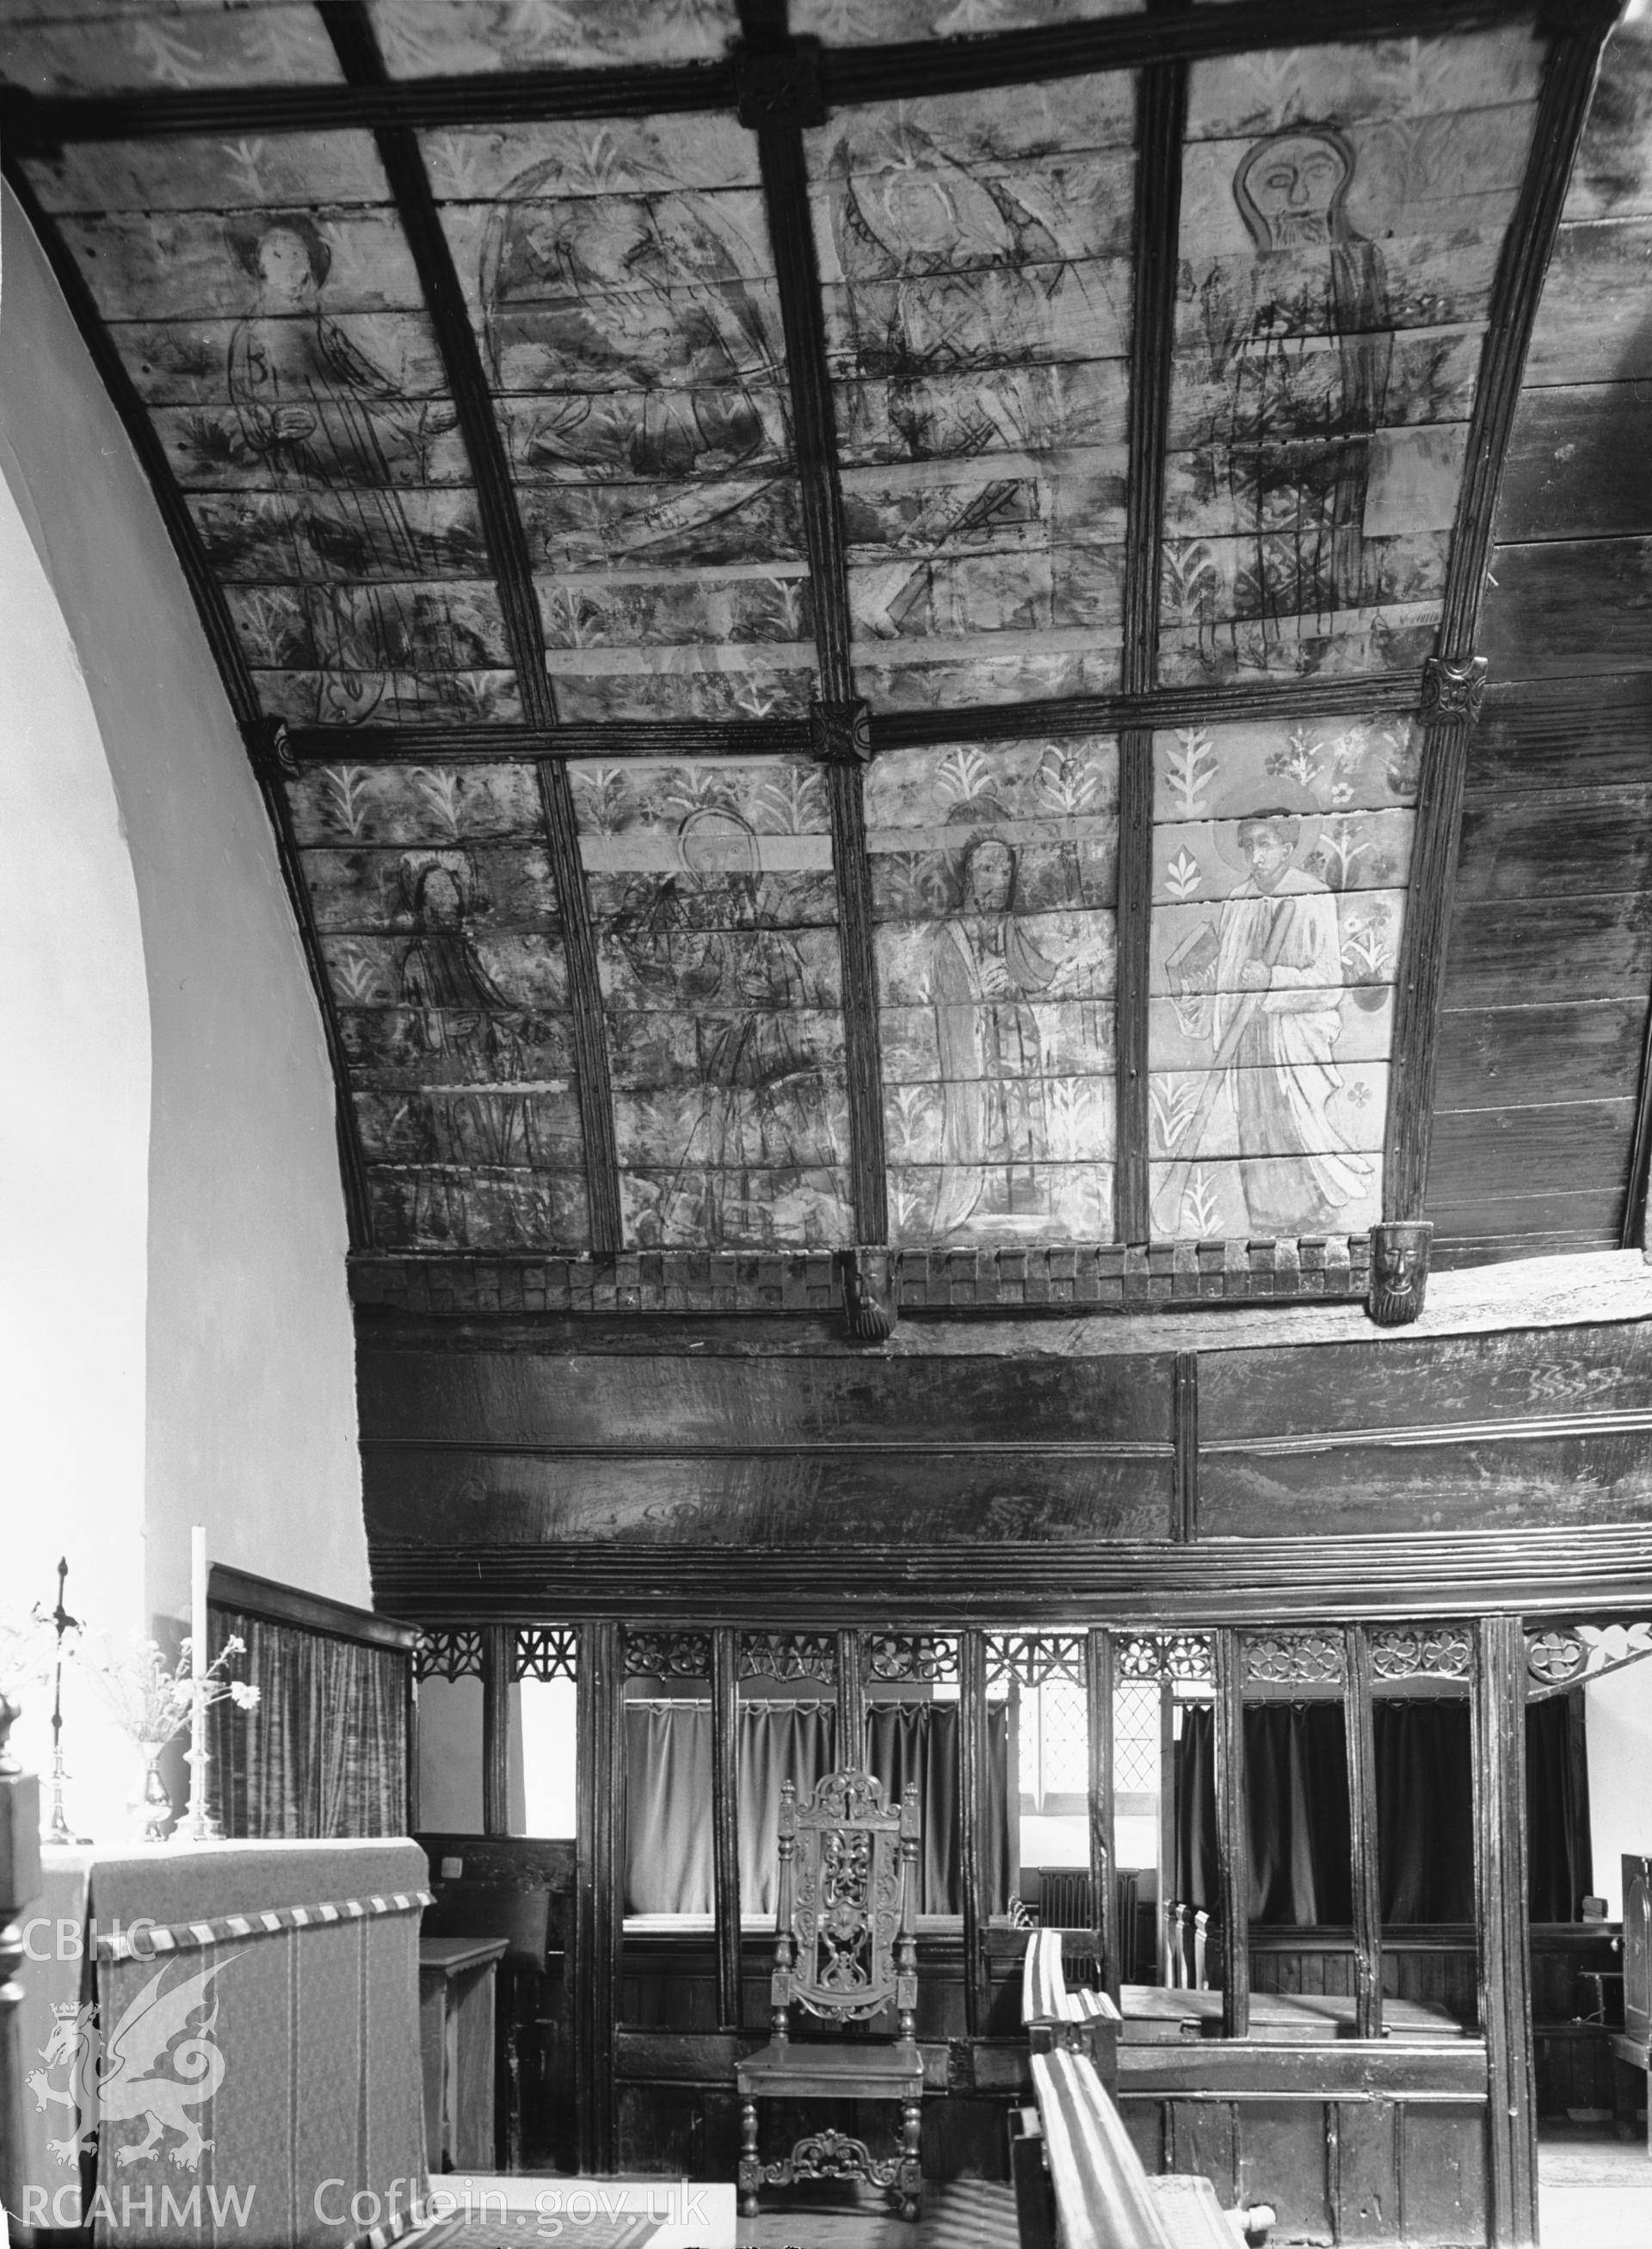 Interior view looking south showing the barrel ceiling in the sanctuary.